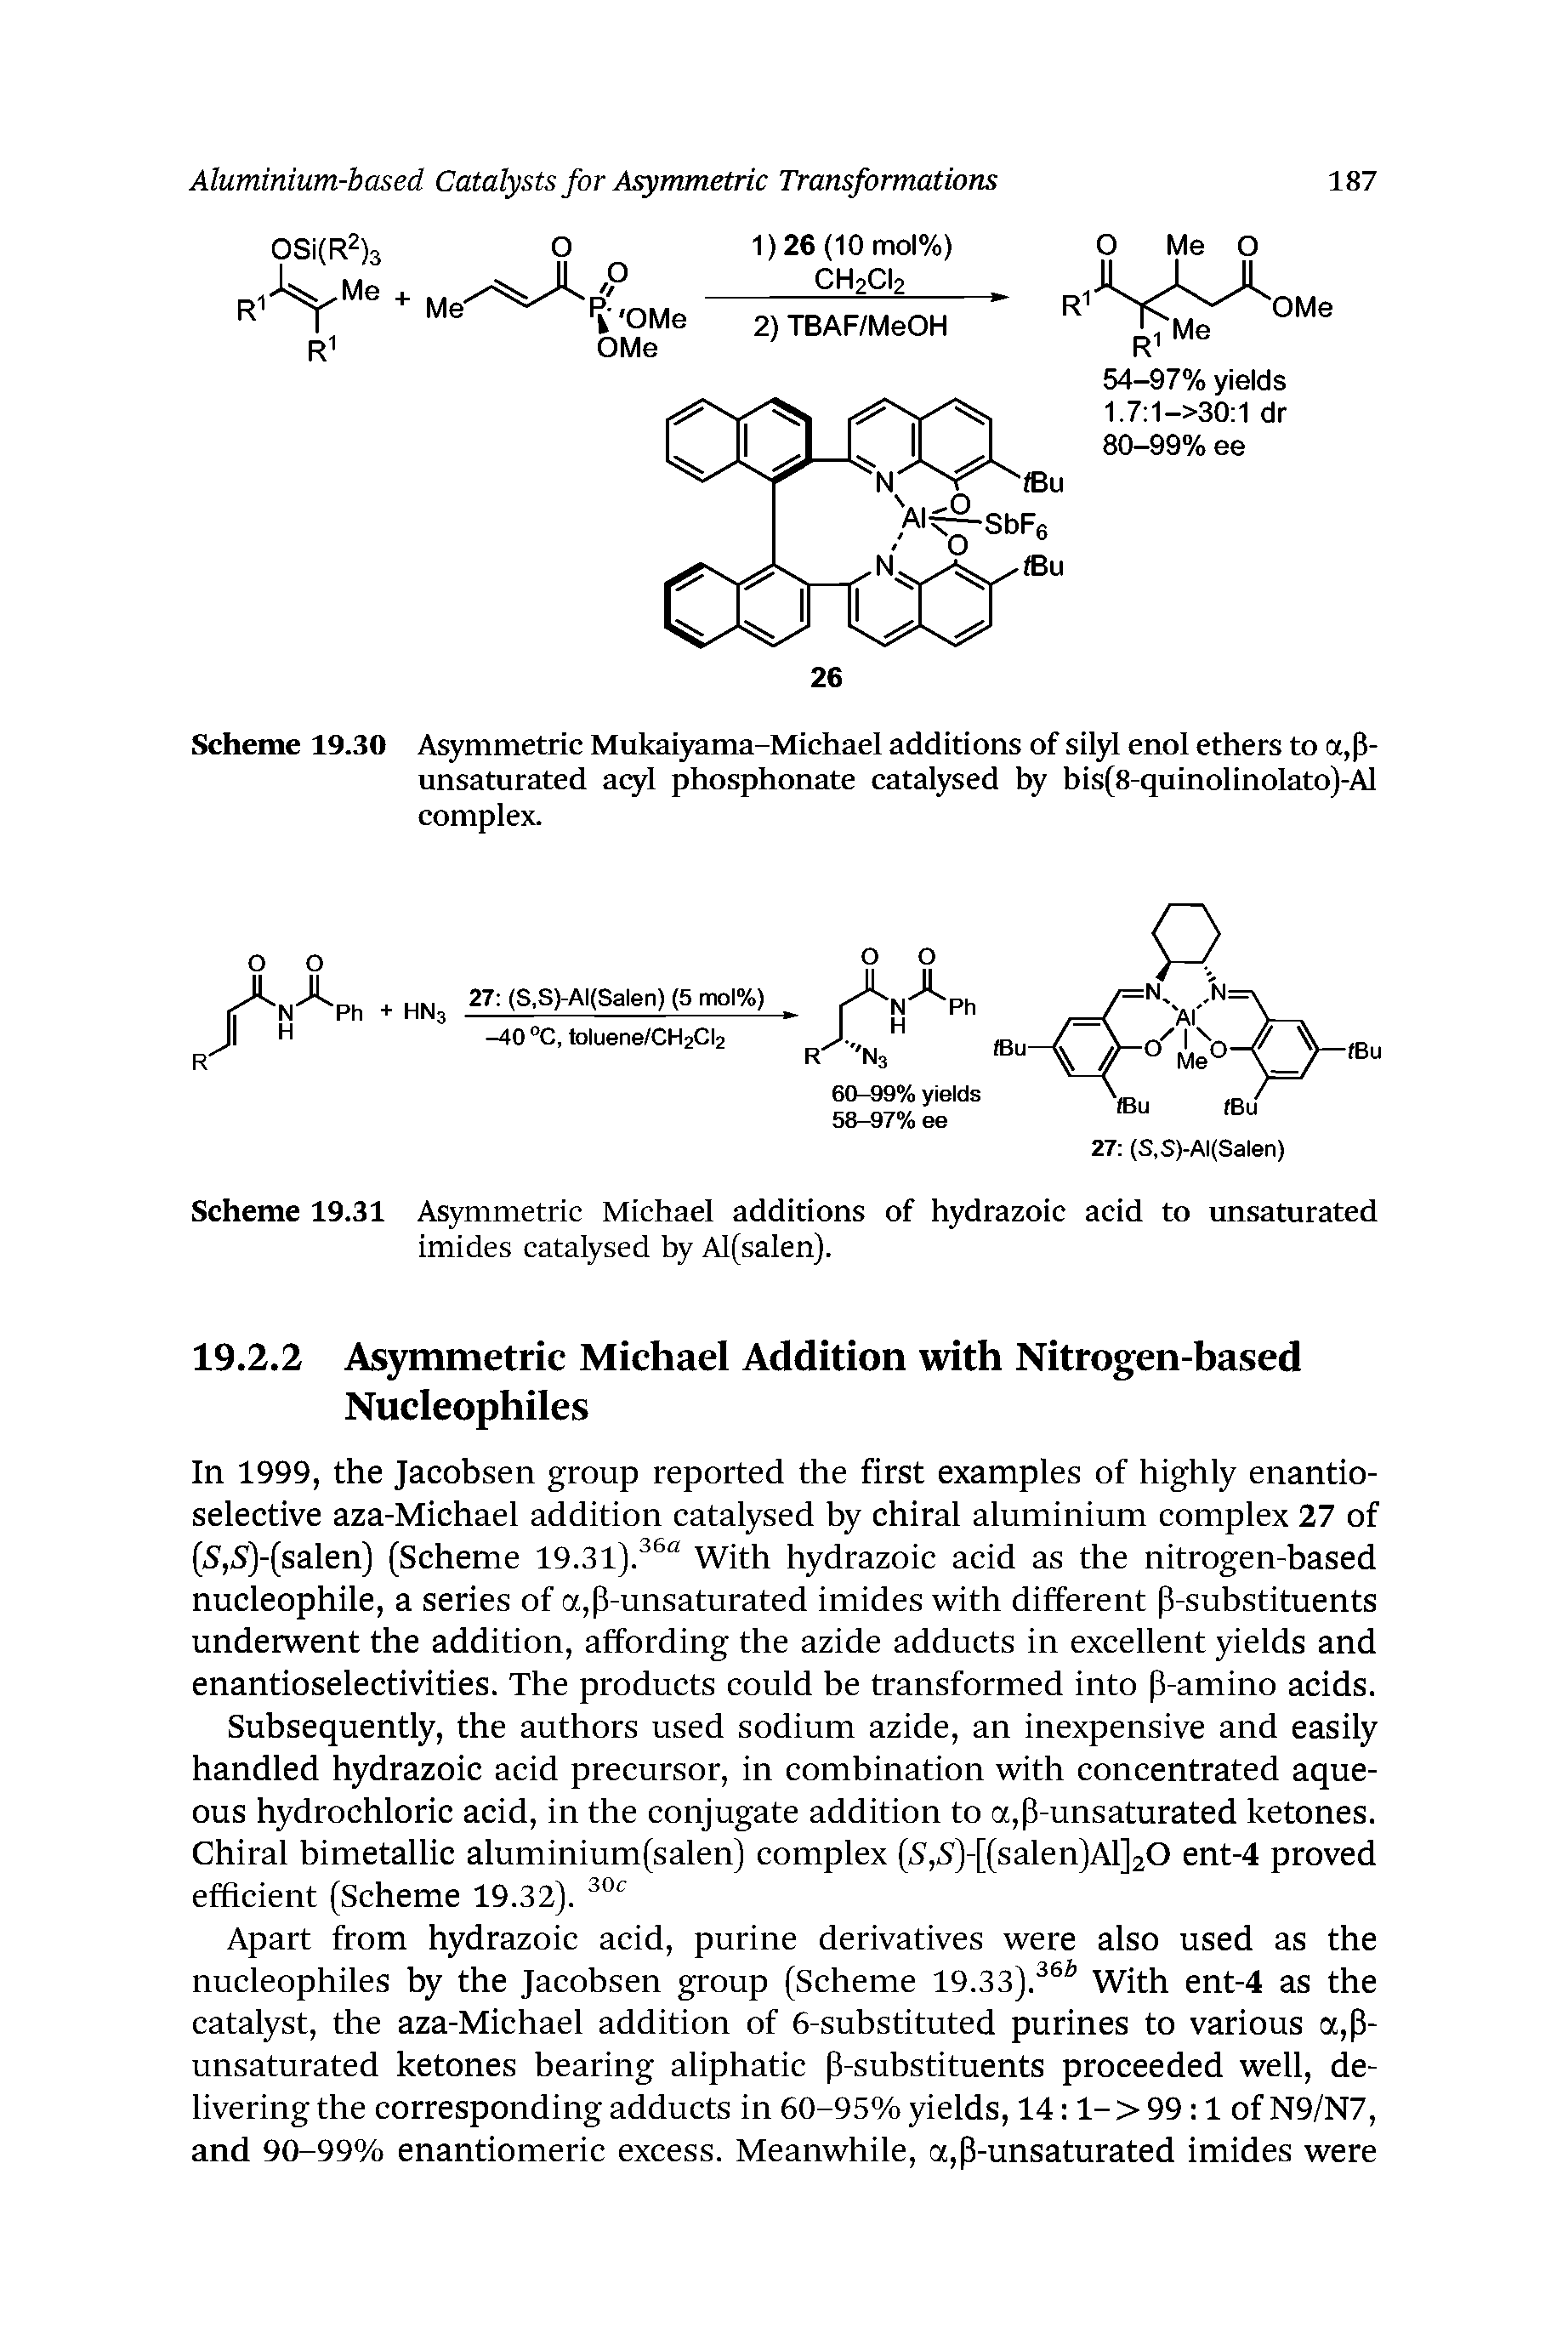 Scheme 19.30 A mmetric Mukaiyama-Michael additions of silyl enol ethers to a,p-unsaturated atyl phosphonate catalysed by bis(8-quinolinolato)-Al complex.